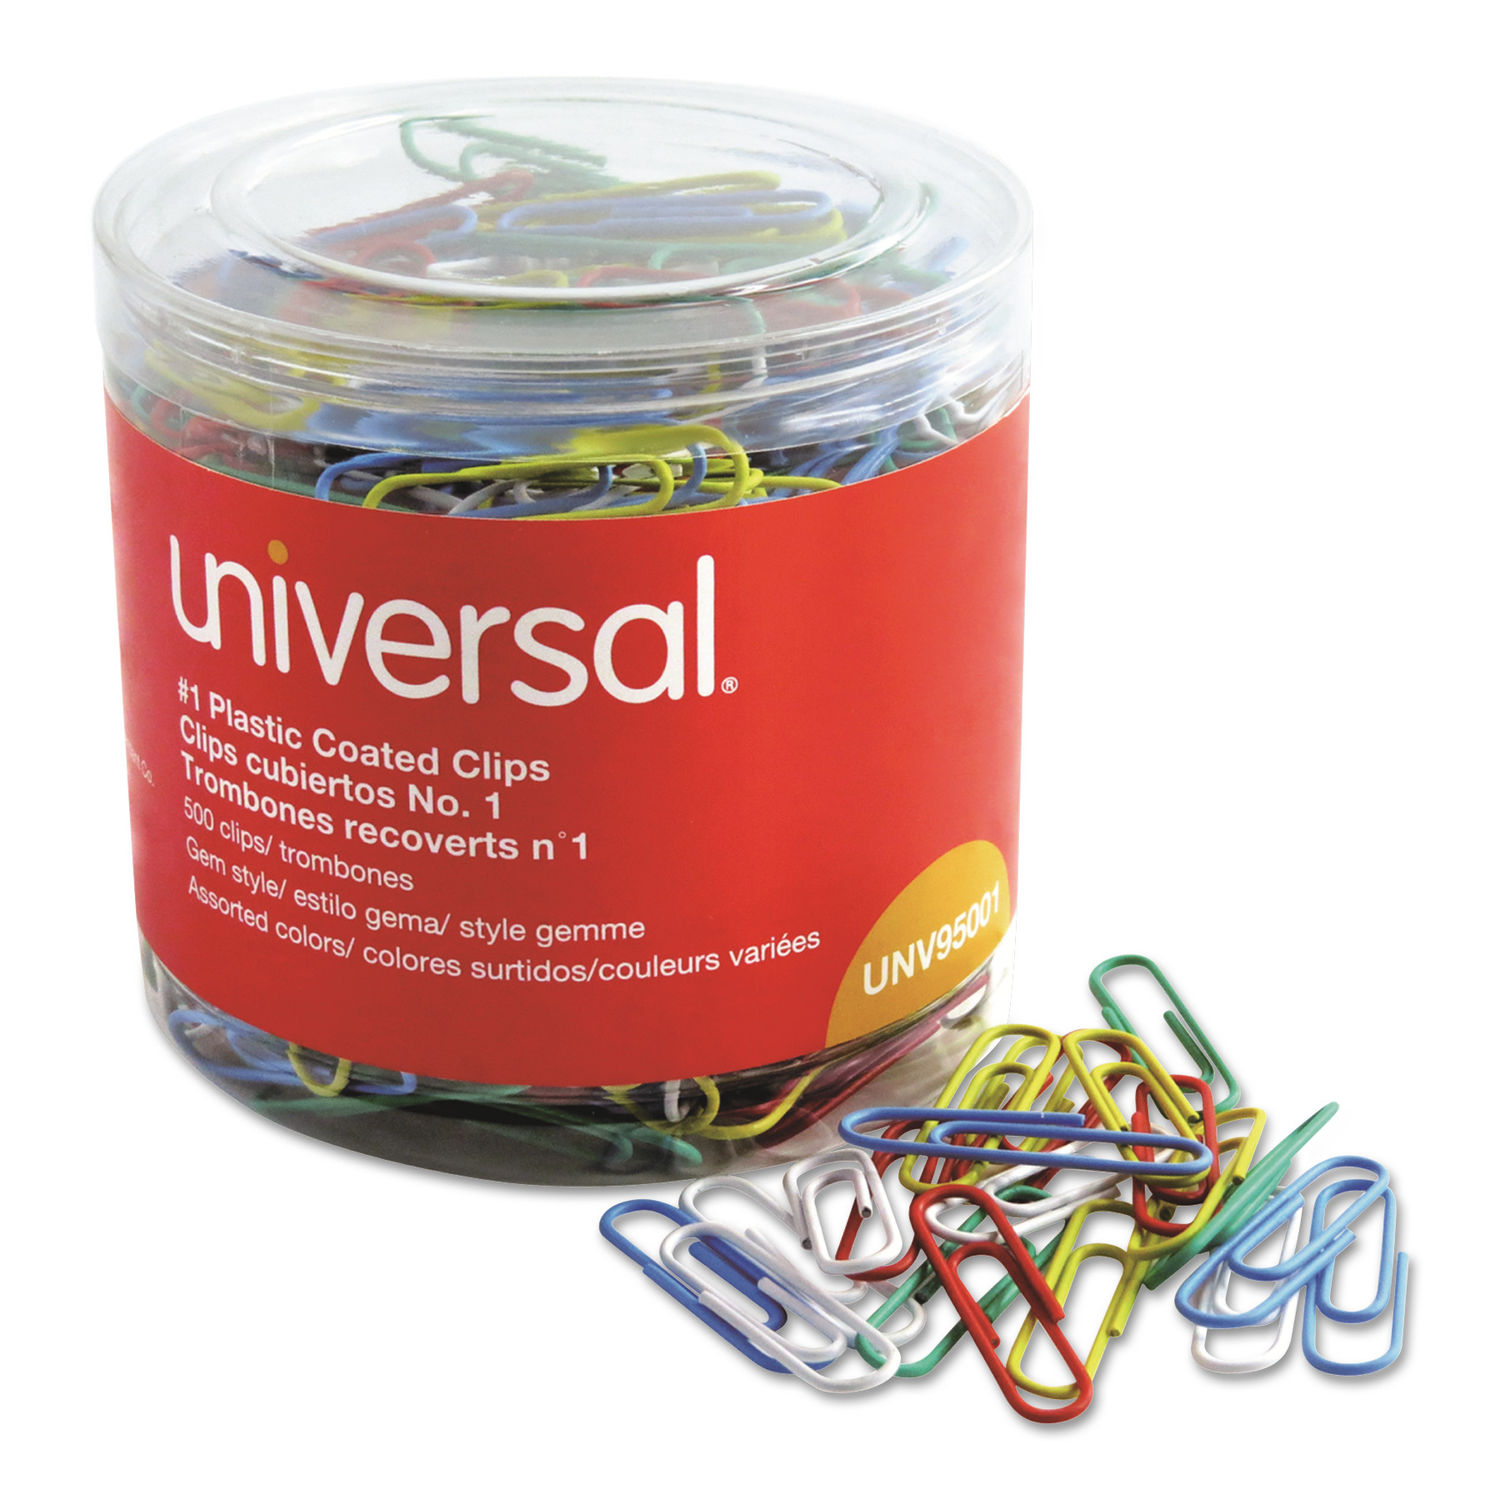 Plastic-Coated Paper Clips with One-Compartment Storage Tub by Universalandreg; UNV95001